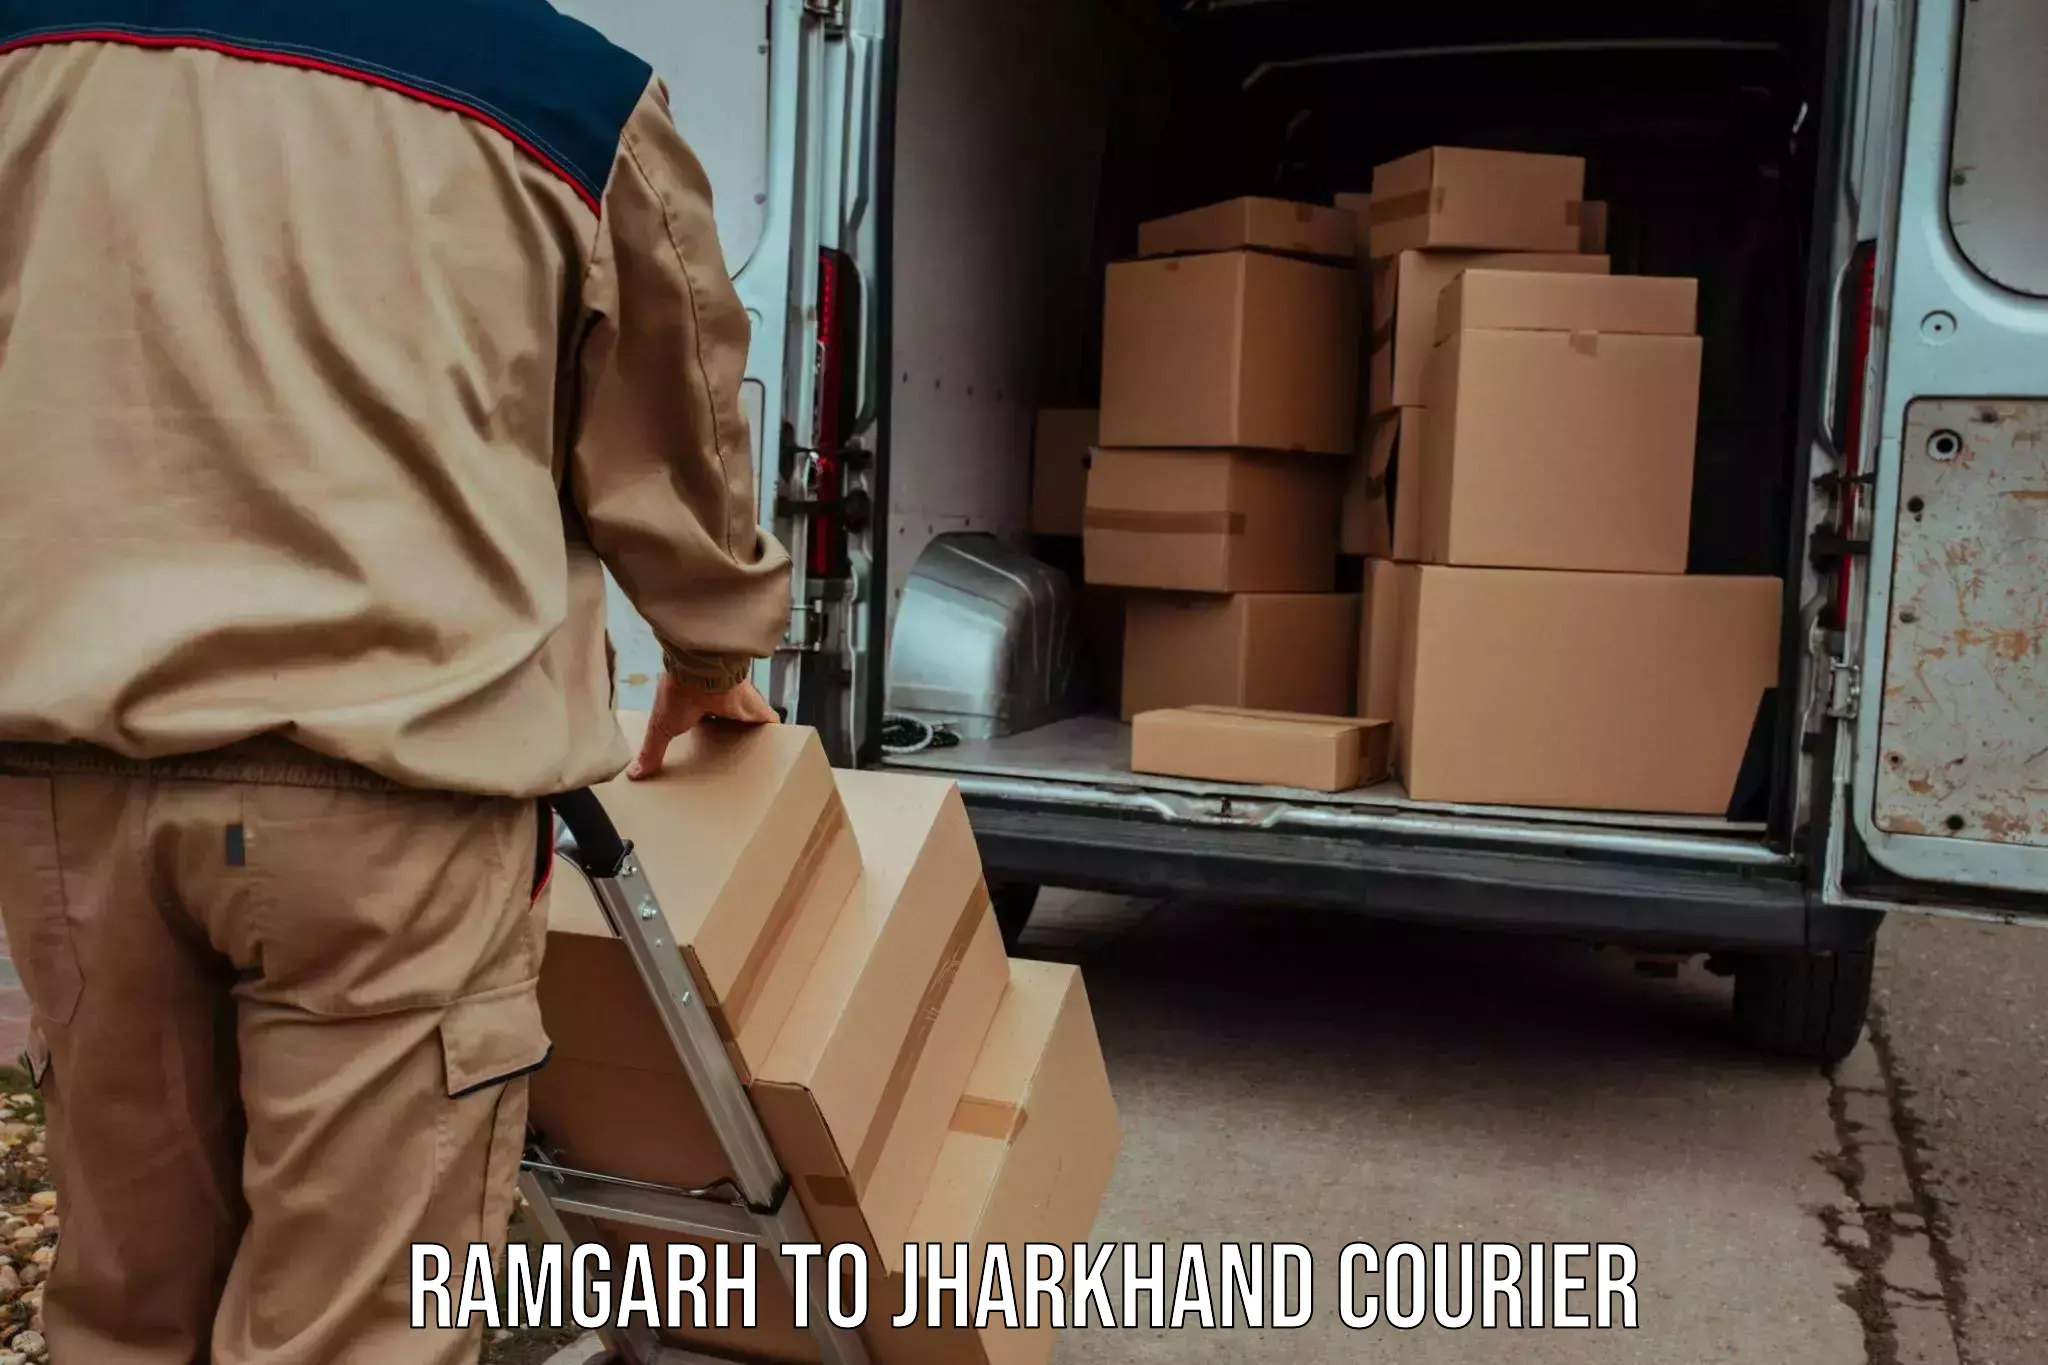 Subscription-based courier Ramgarh to Jharkhand